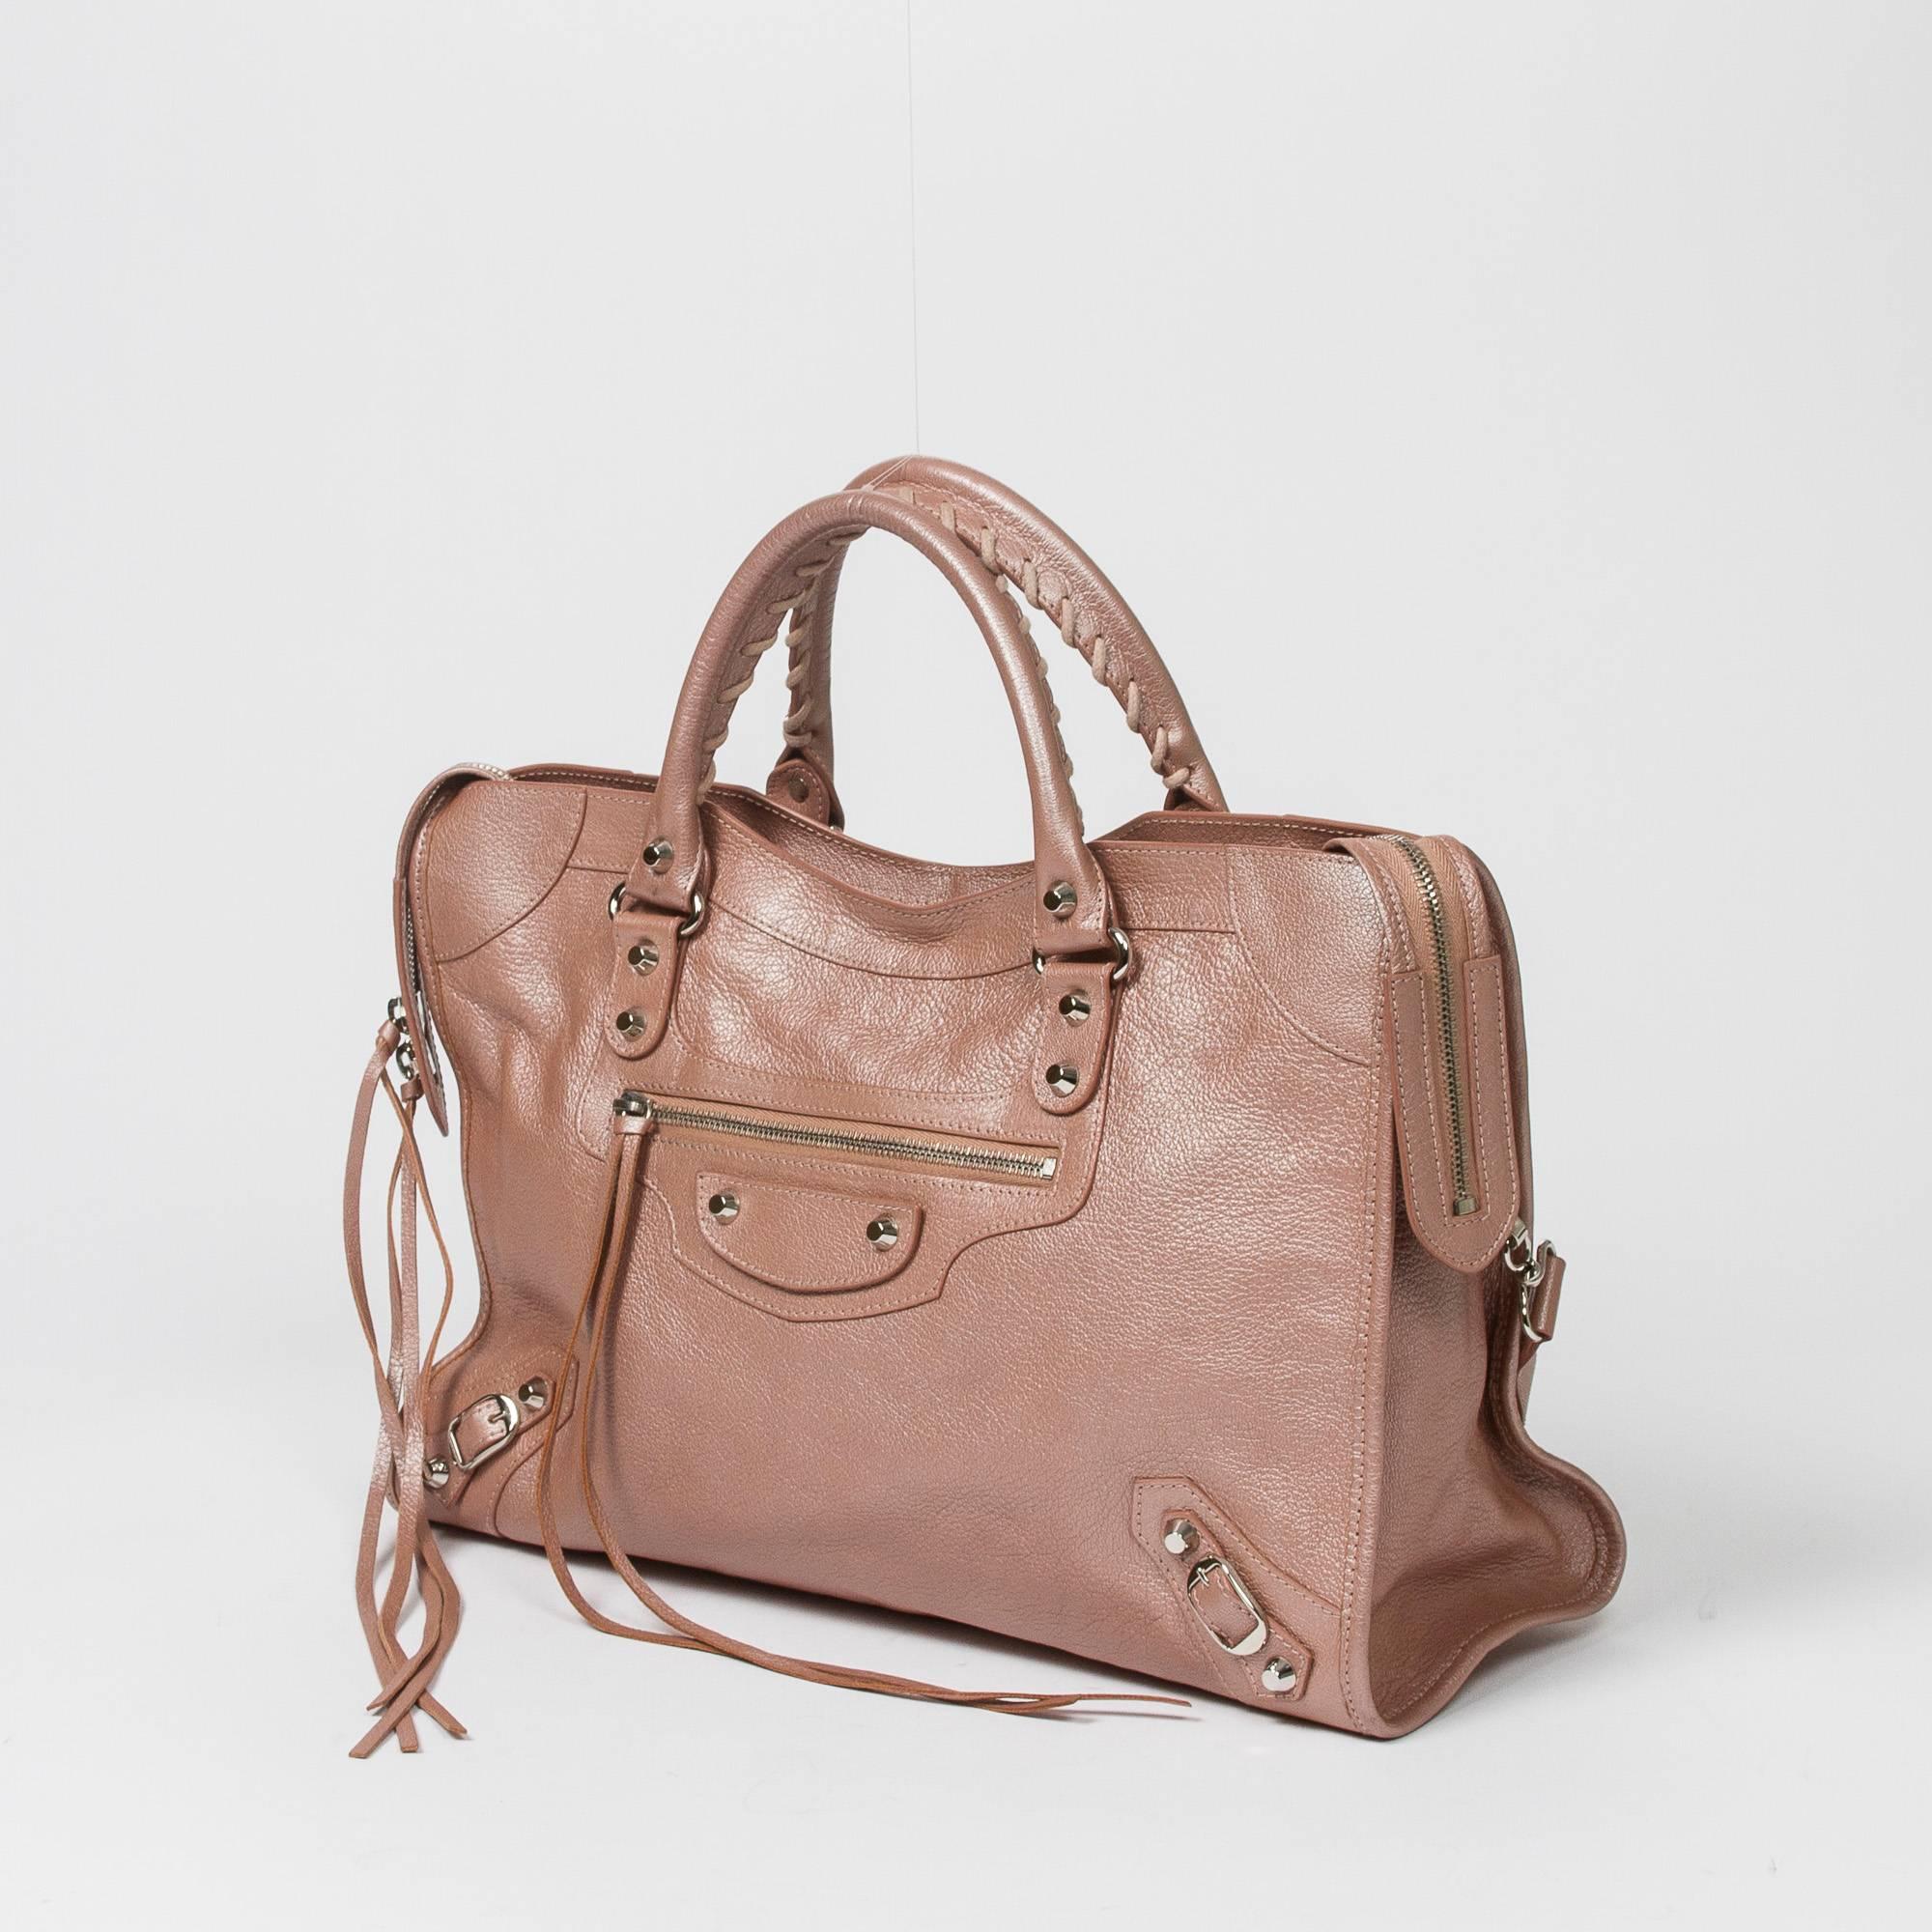 Classic City 38 in light pink metallic grained leather with shoulder strap and silver tone hardware. Double zip closure. Black fabric lined interior with 2 zip pockets and one zip pocket. Dustbag included. Production code 115748-5670-J-527276. Very